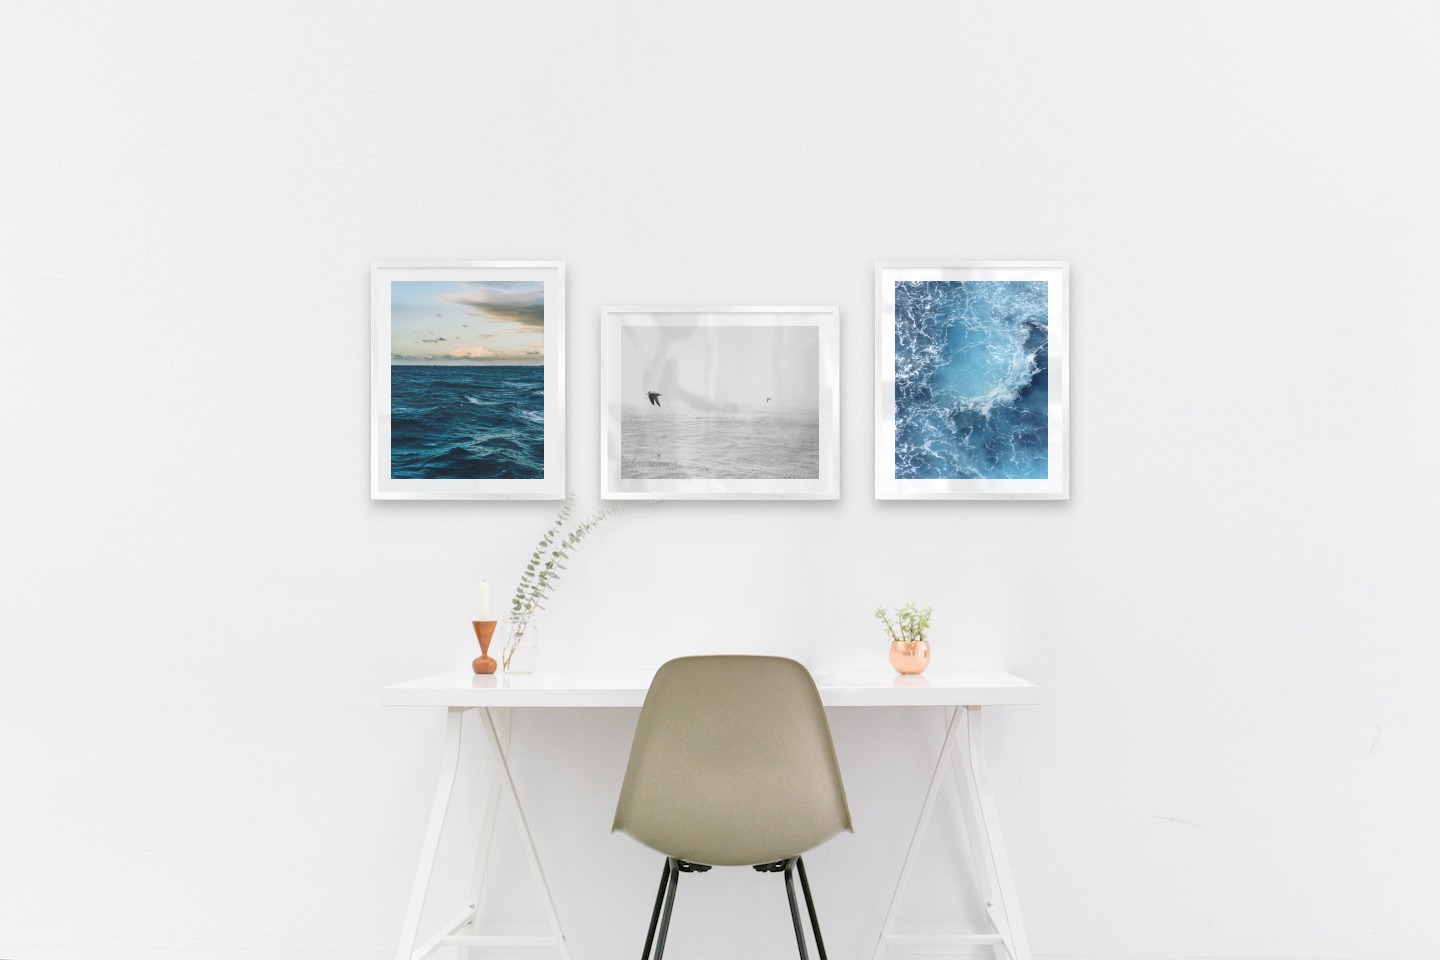 Gallery wall with picture frames in silver in sizes 40x50 with prints "Somewhat out at sea", "Birds over the sea" and "Sea from above"